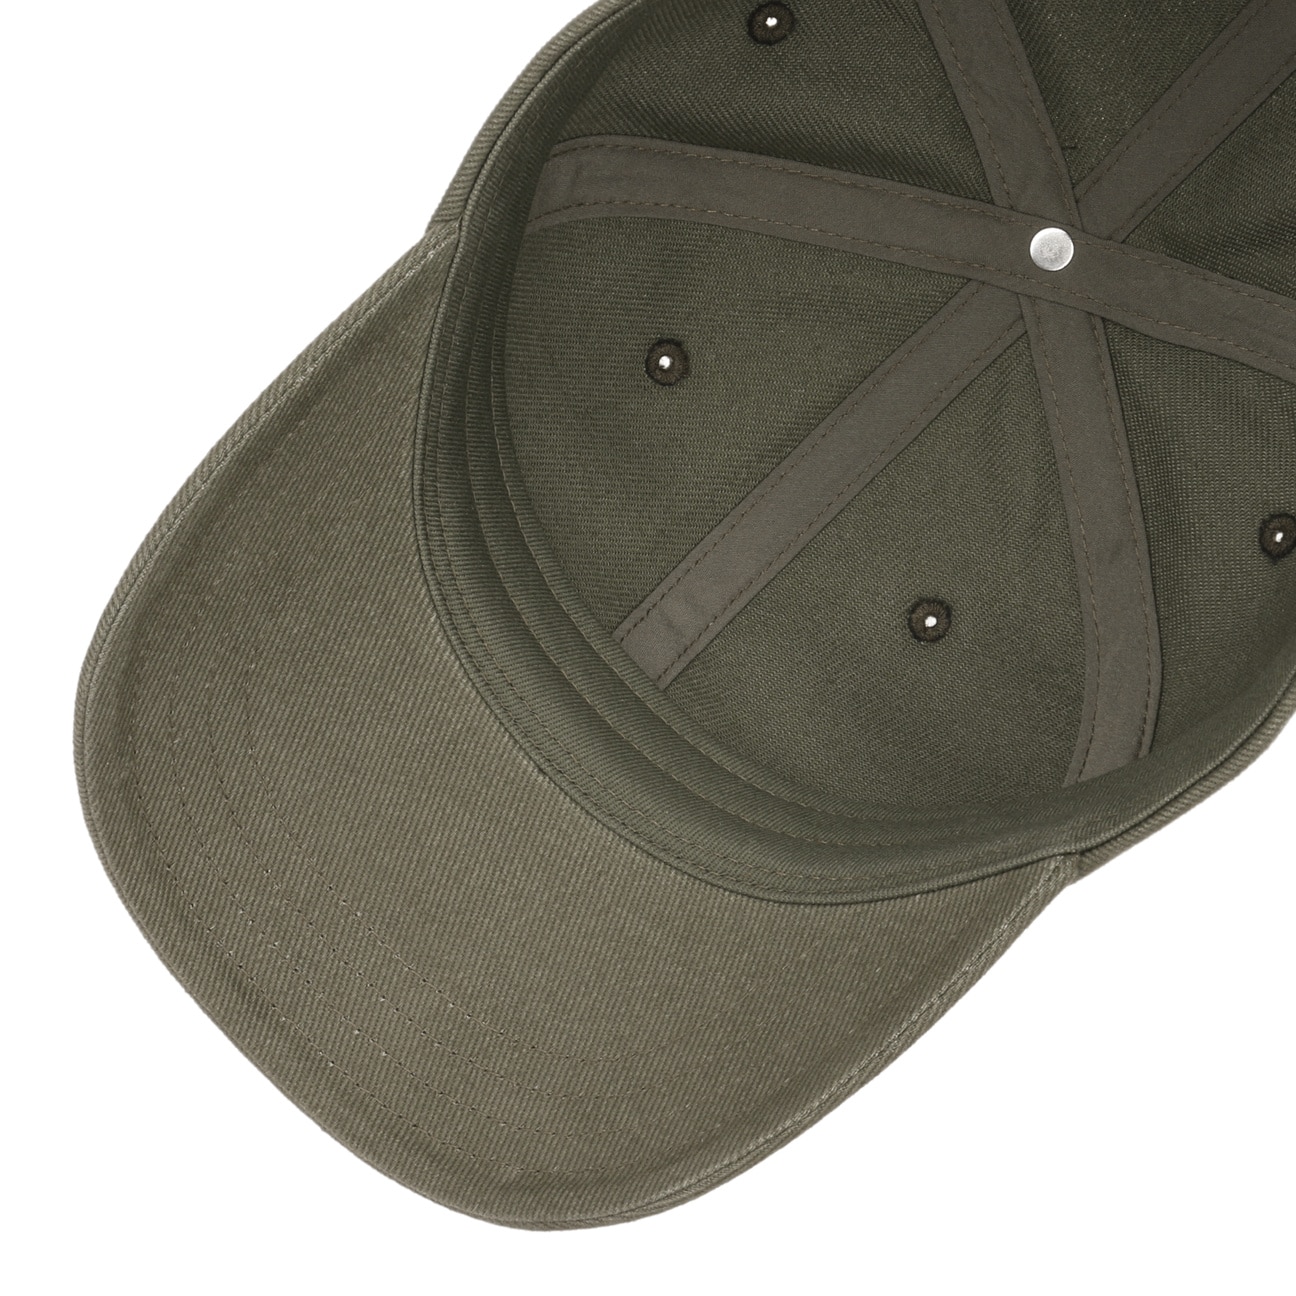 Brushed Twill Cap by Stetson - 49,00 €